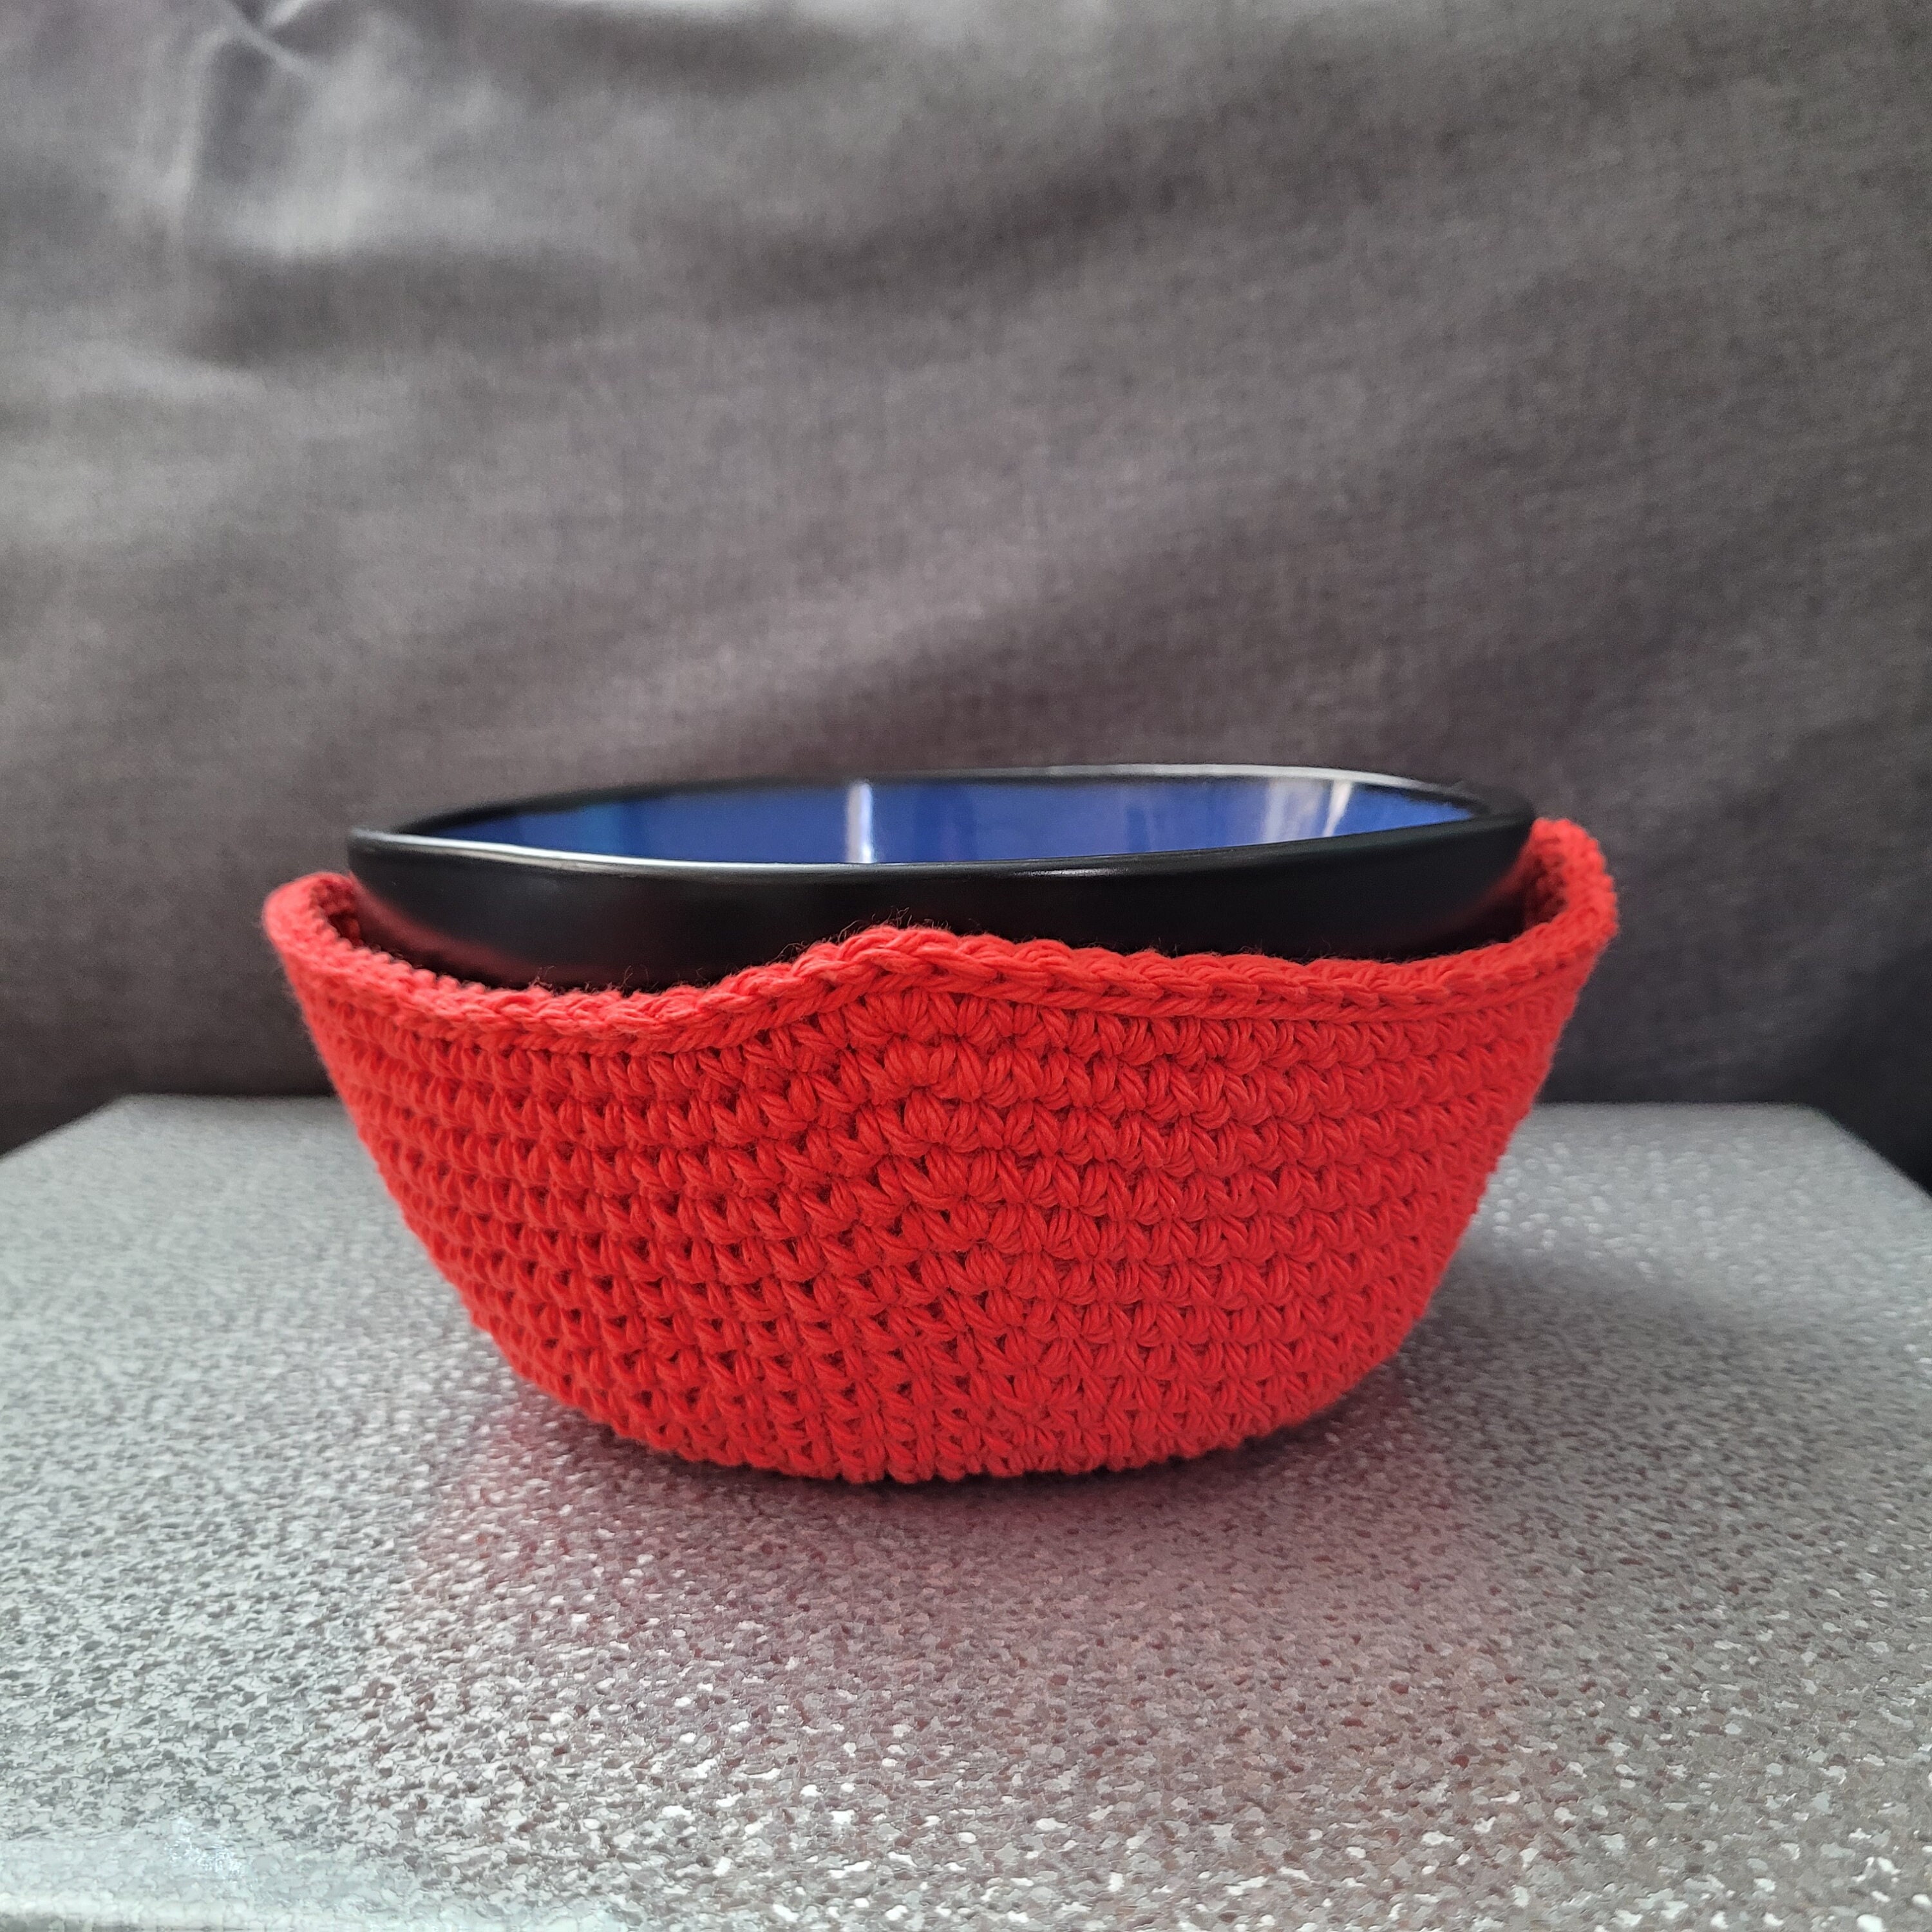 100% Cotton Microwavable Bowl Cozy - From The Desk Of – Cool Hand Nukes